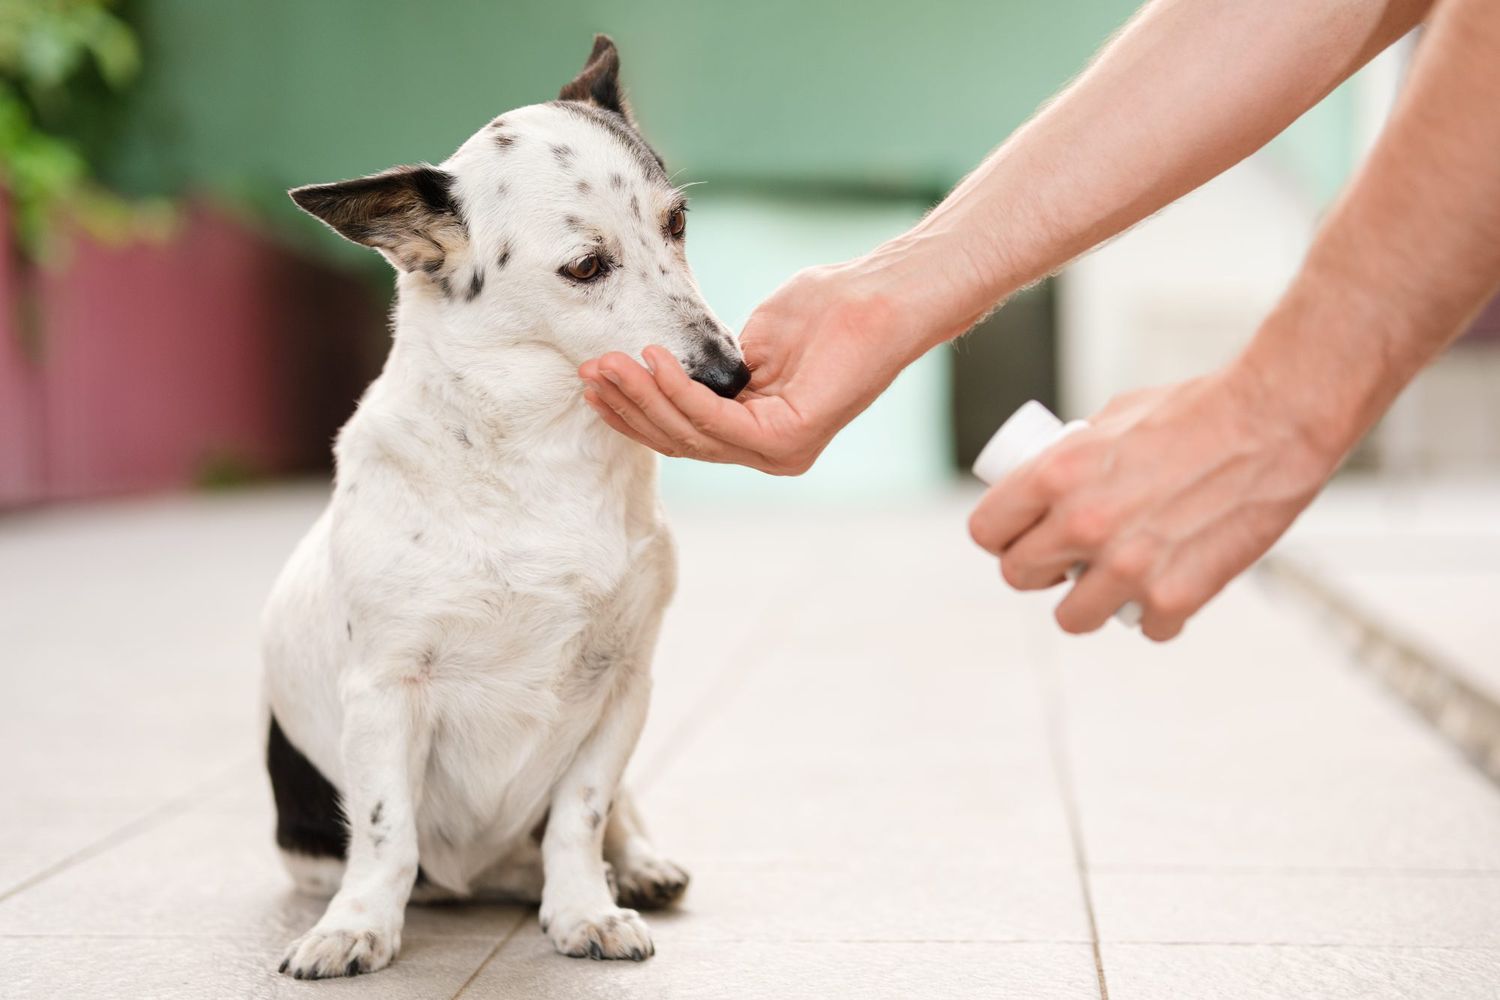 human hand gives medicine to small white dog with black spots